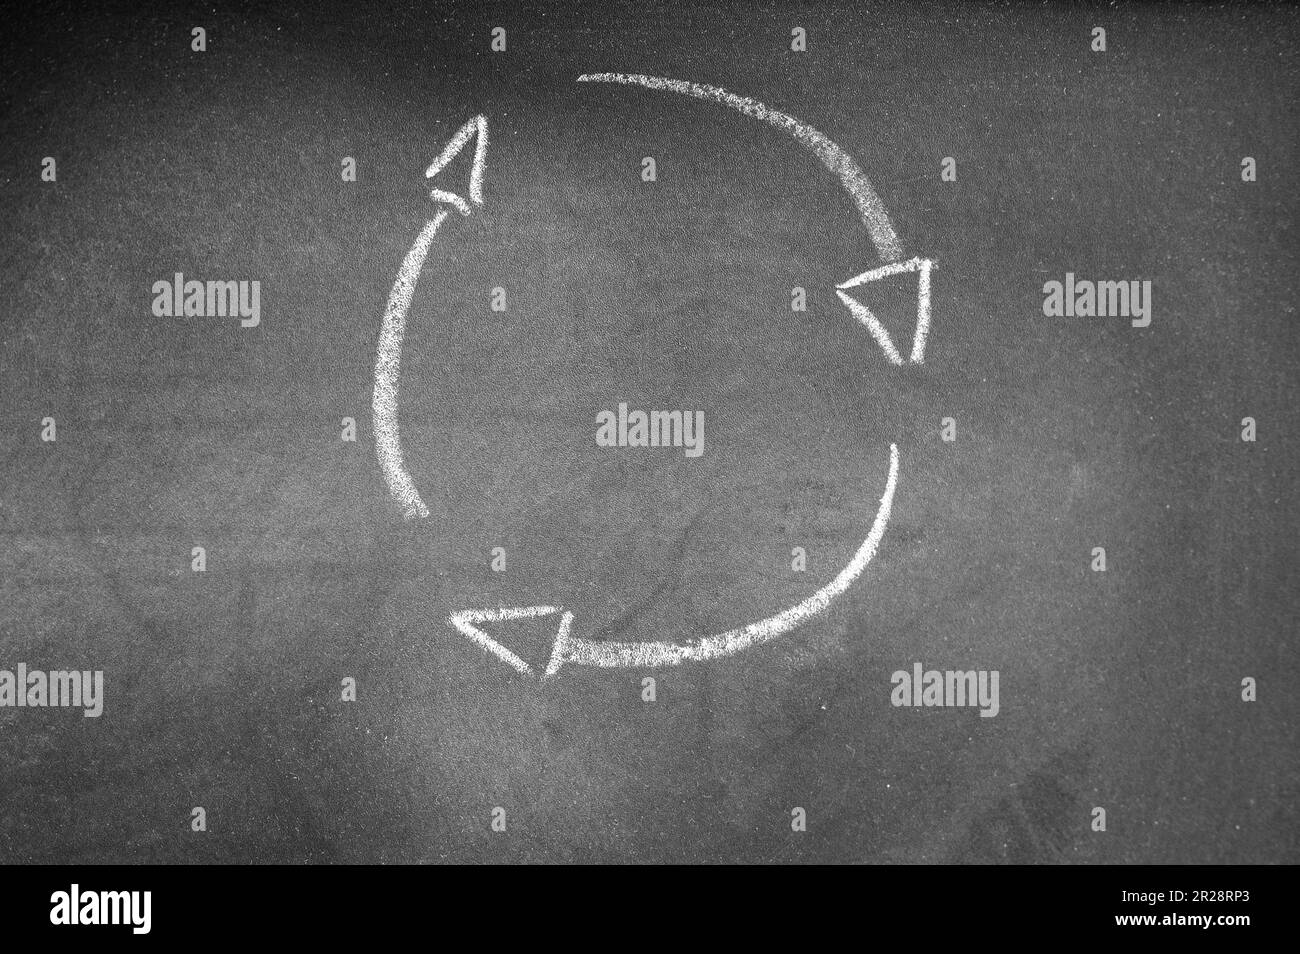 Three rotating arrows drawn on a blackboard with white chalk to represent something cyclical, such as recycling, the economy, etc. Stock Photo